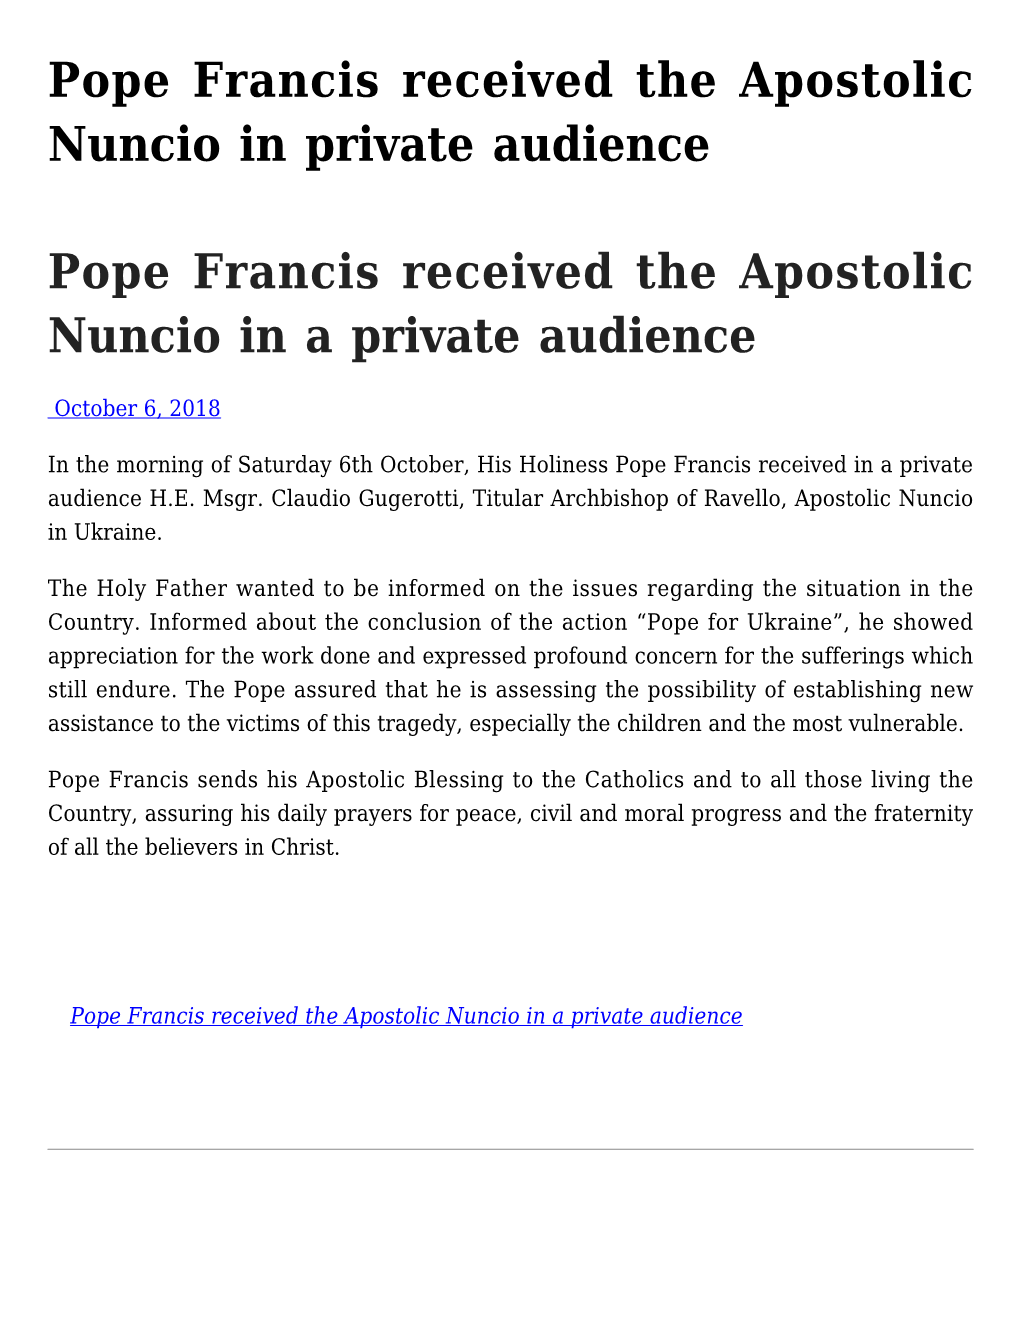 Pope Francis Received the Apostolic Nuncio in Private Audience